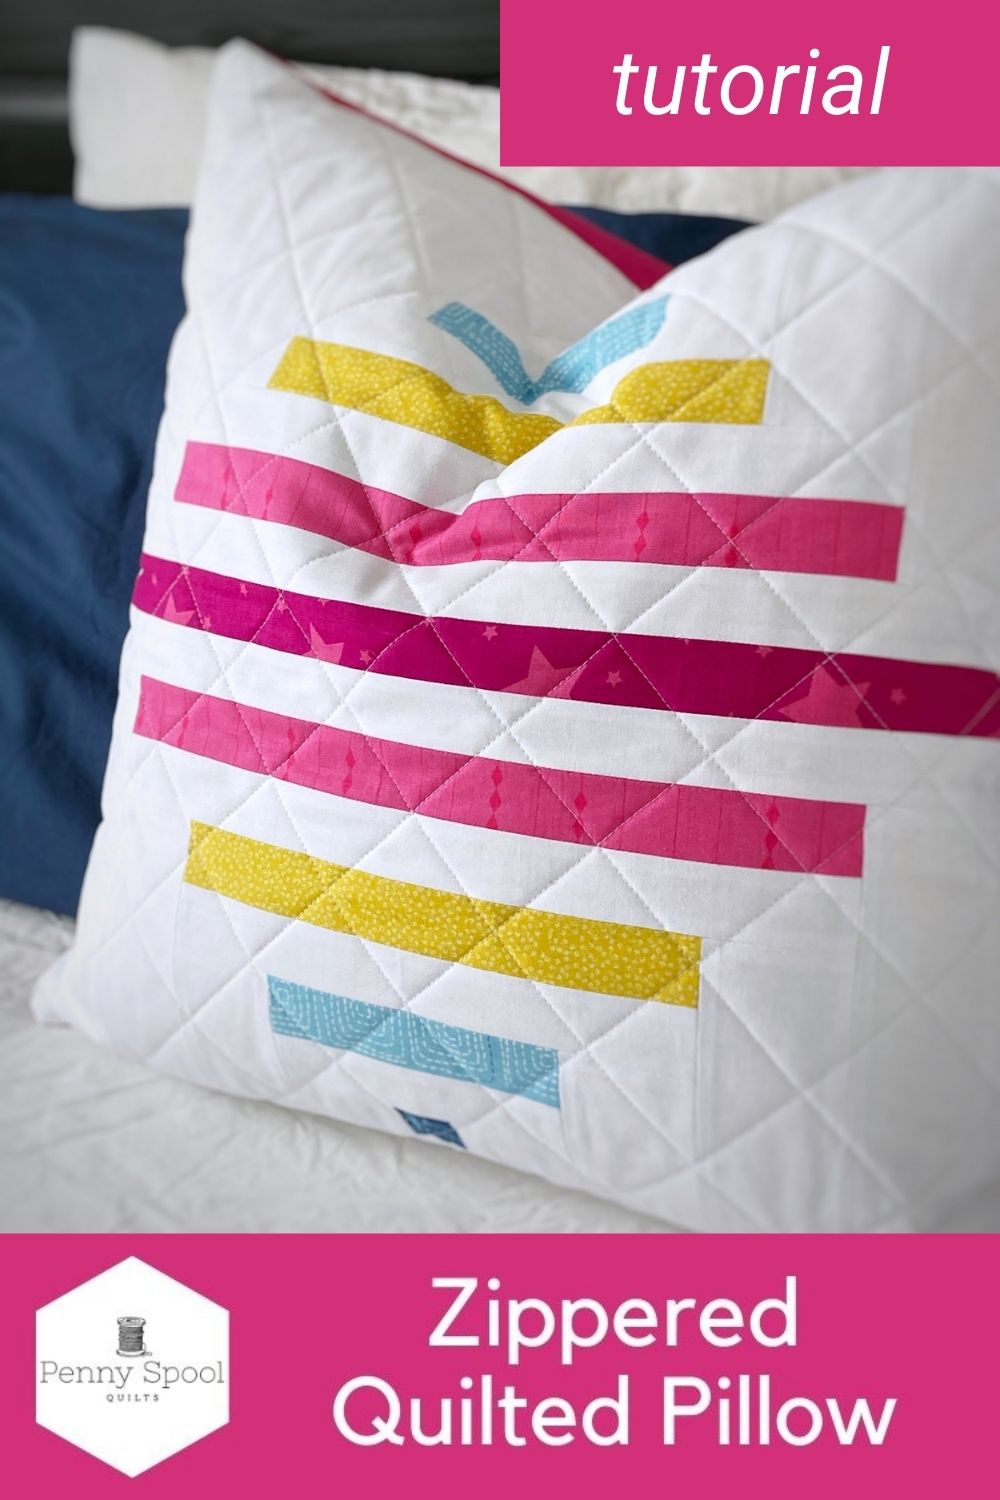 Make a Quilted Zipper Pillow: Photo Tutorial - Suzy Quilts